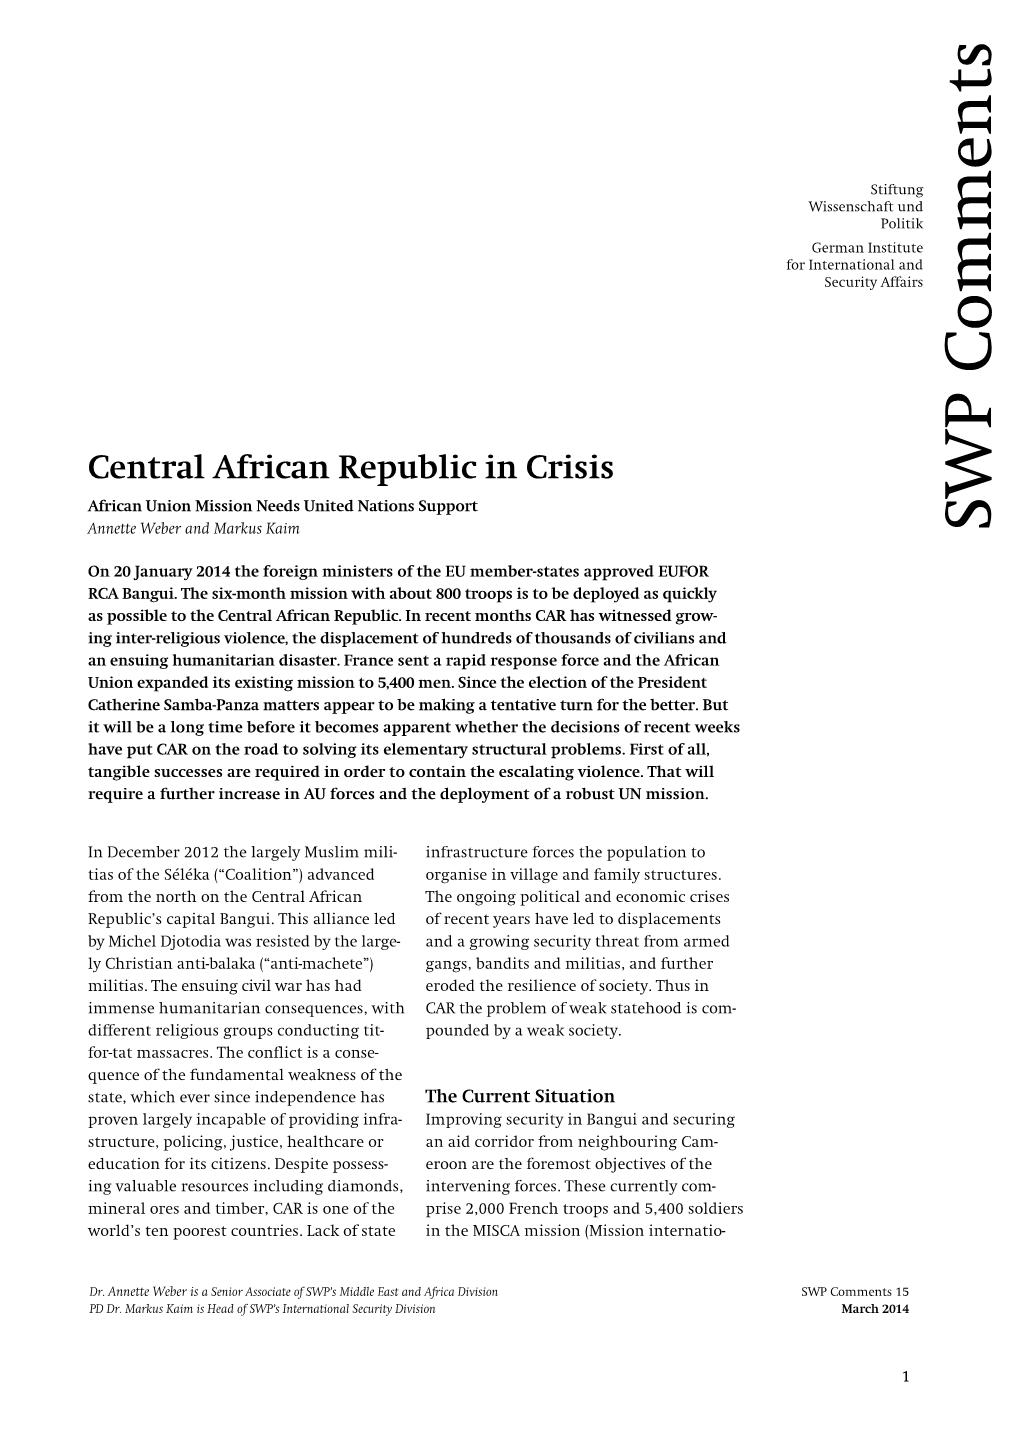 Central African Republic in Crisis. African Union Mission Needs